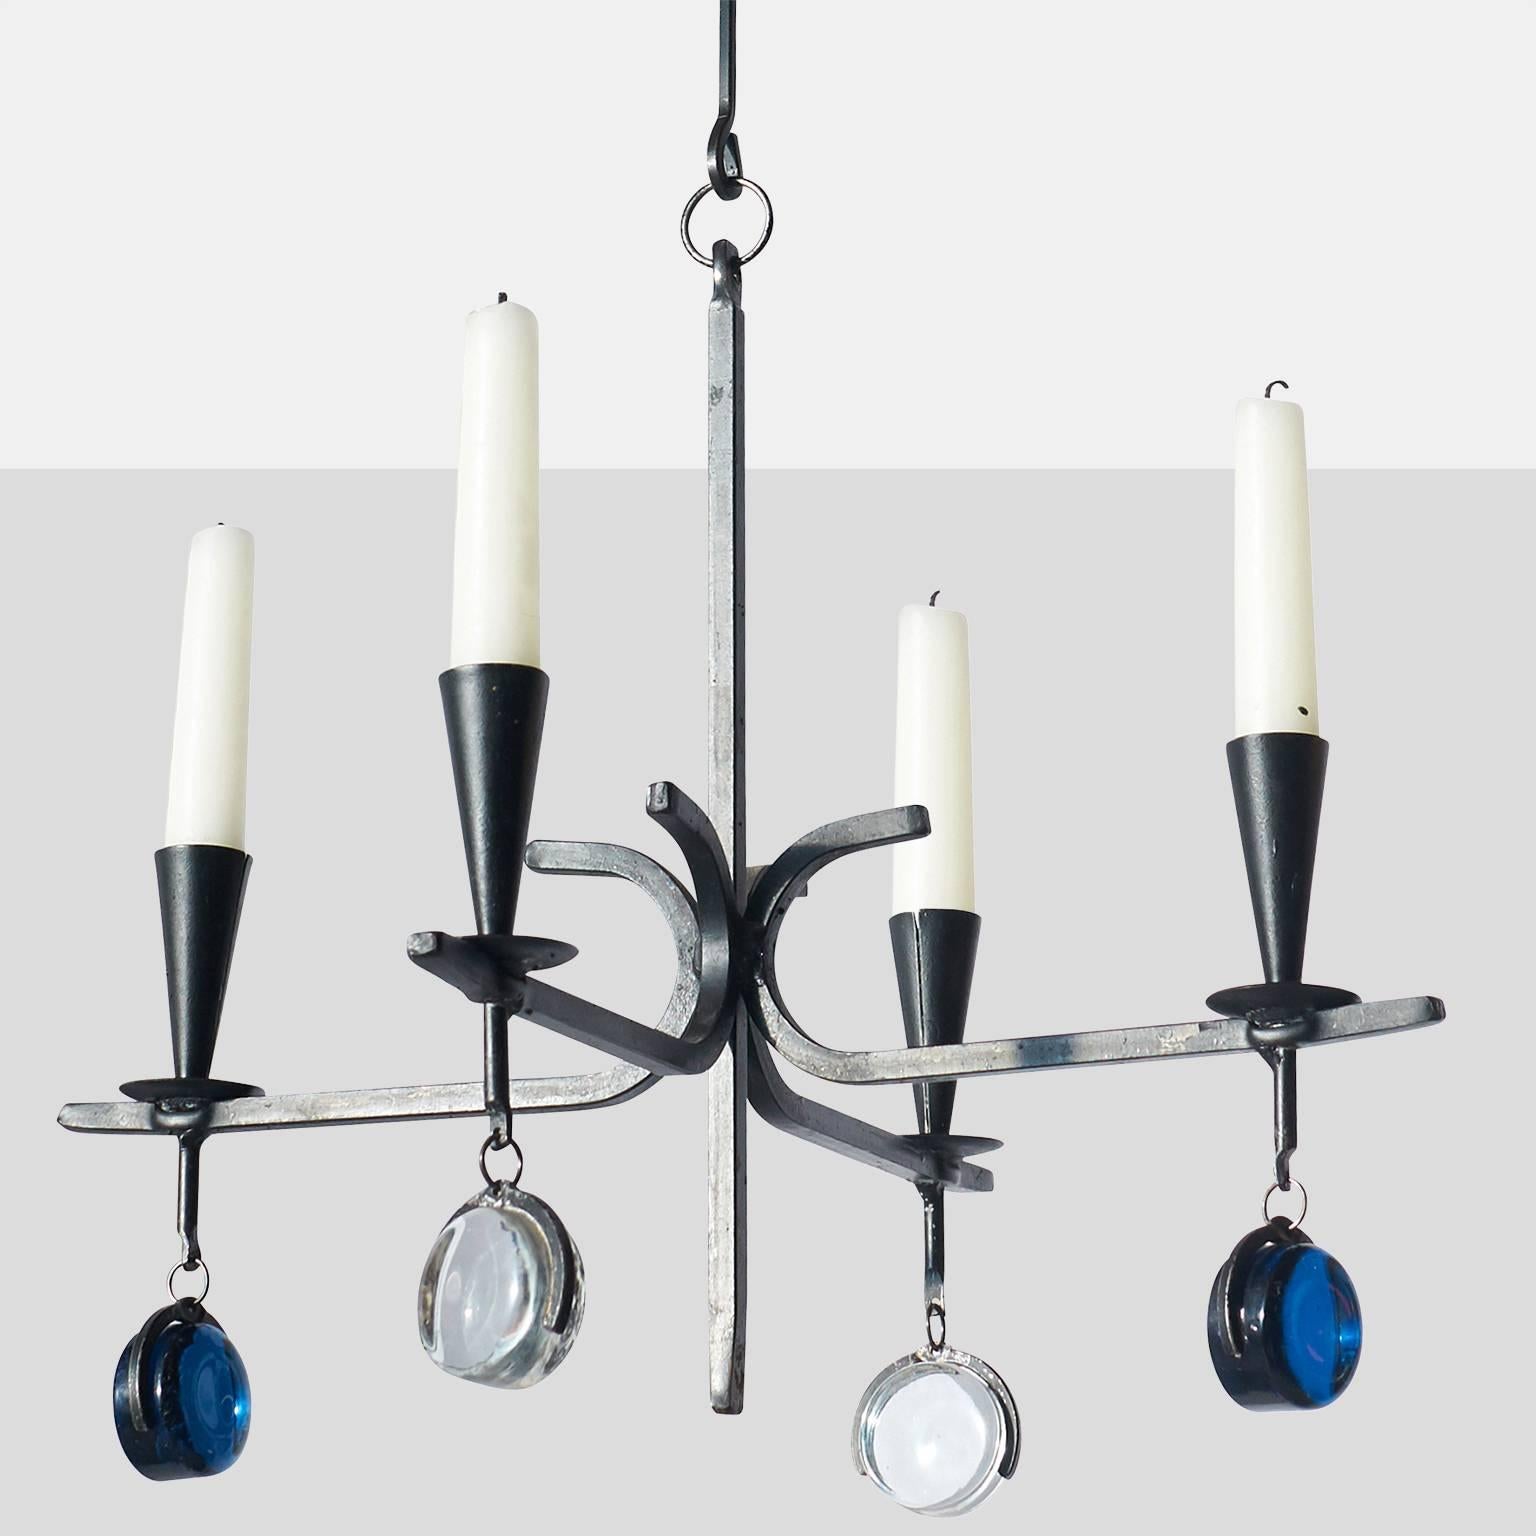 An iron candelabra with four arms for candles for Kosta Boda with blue and clear glass finials on each arm.  
Denmark, circa 1960s.
